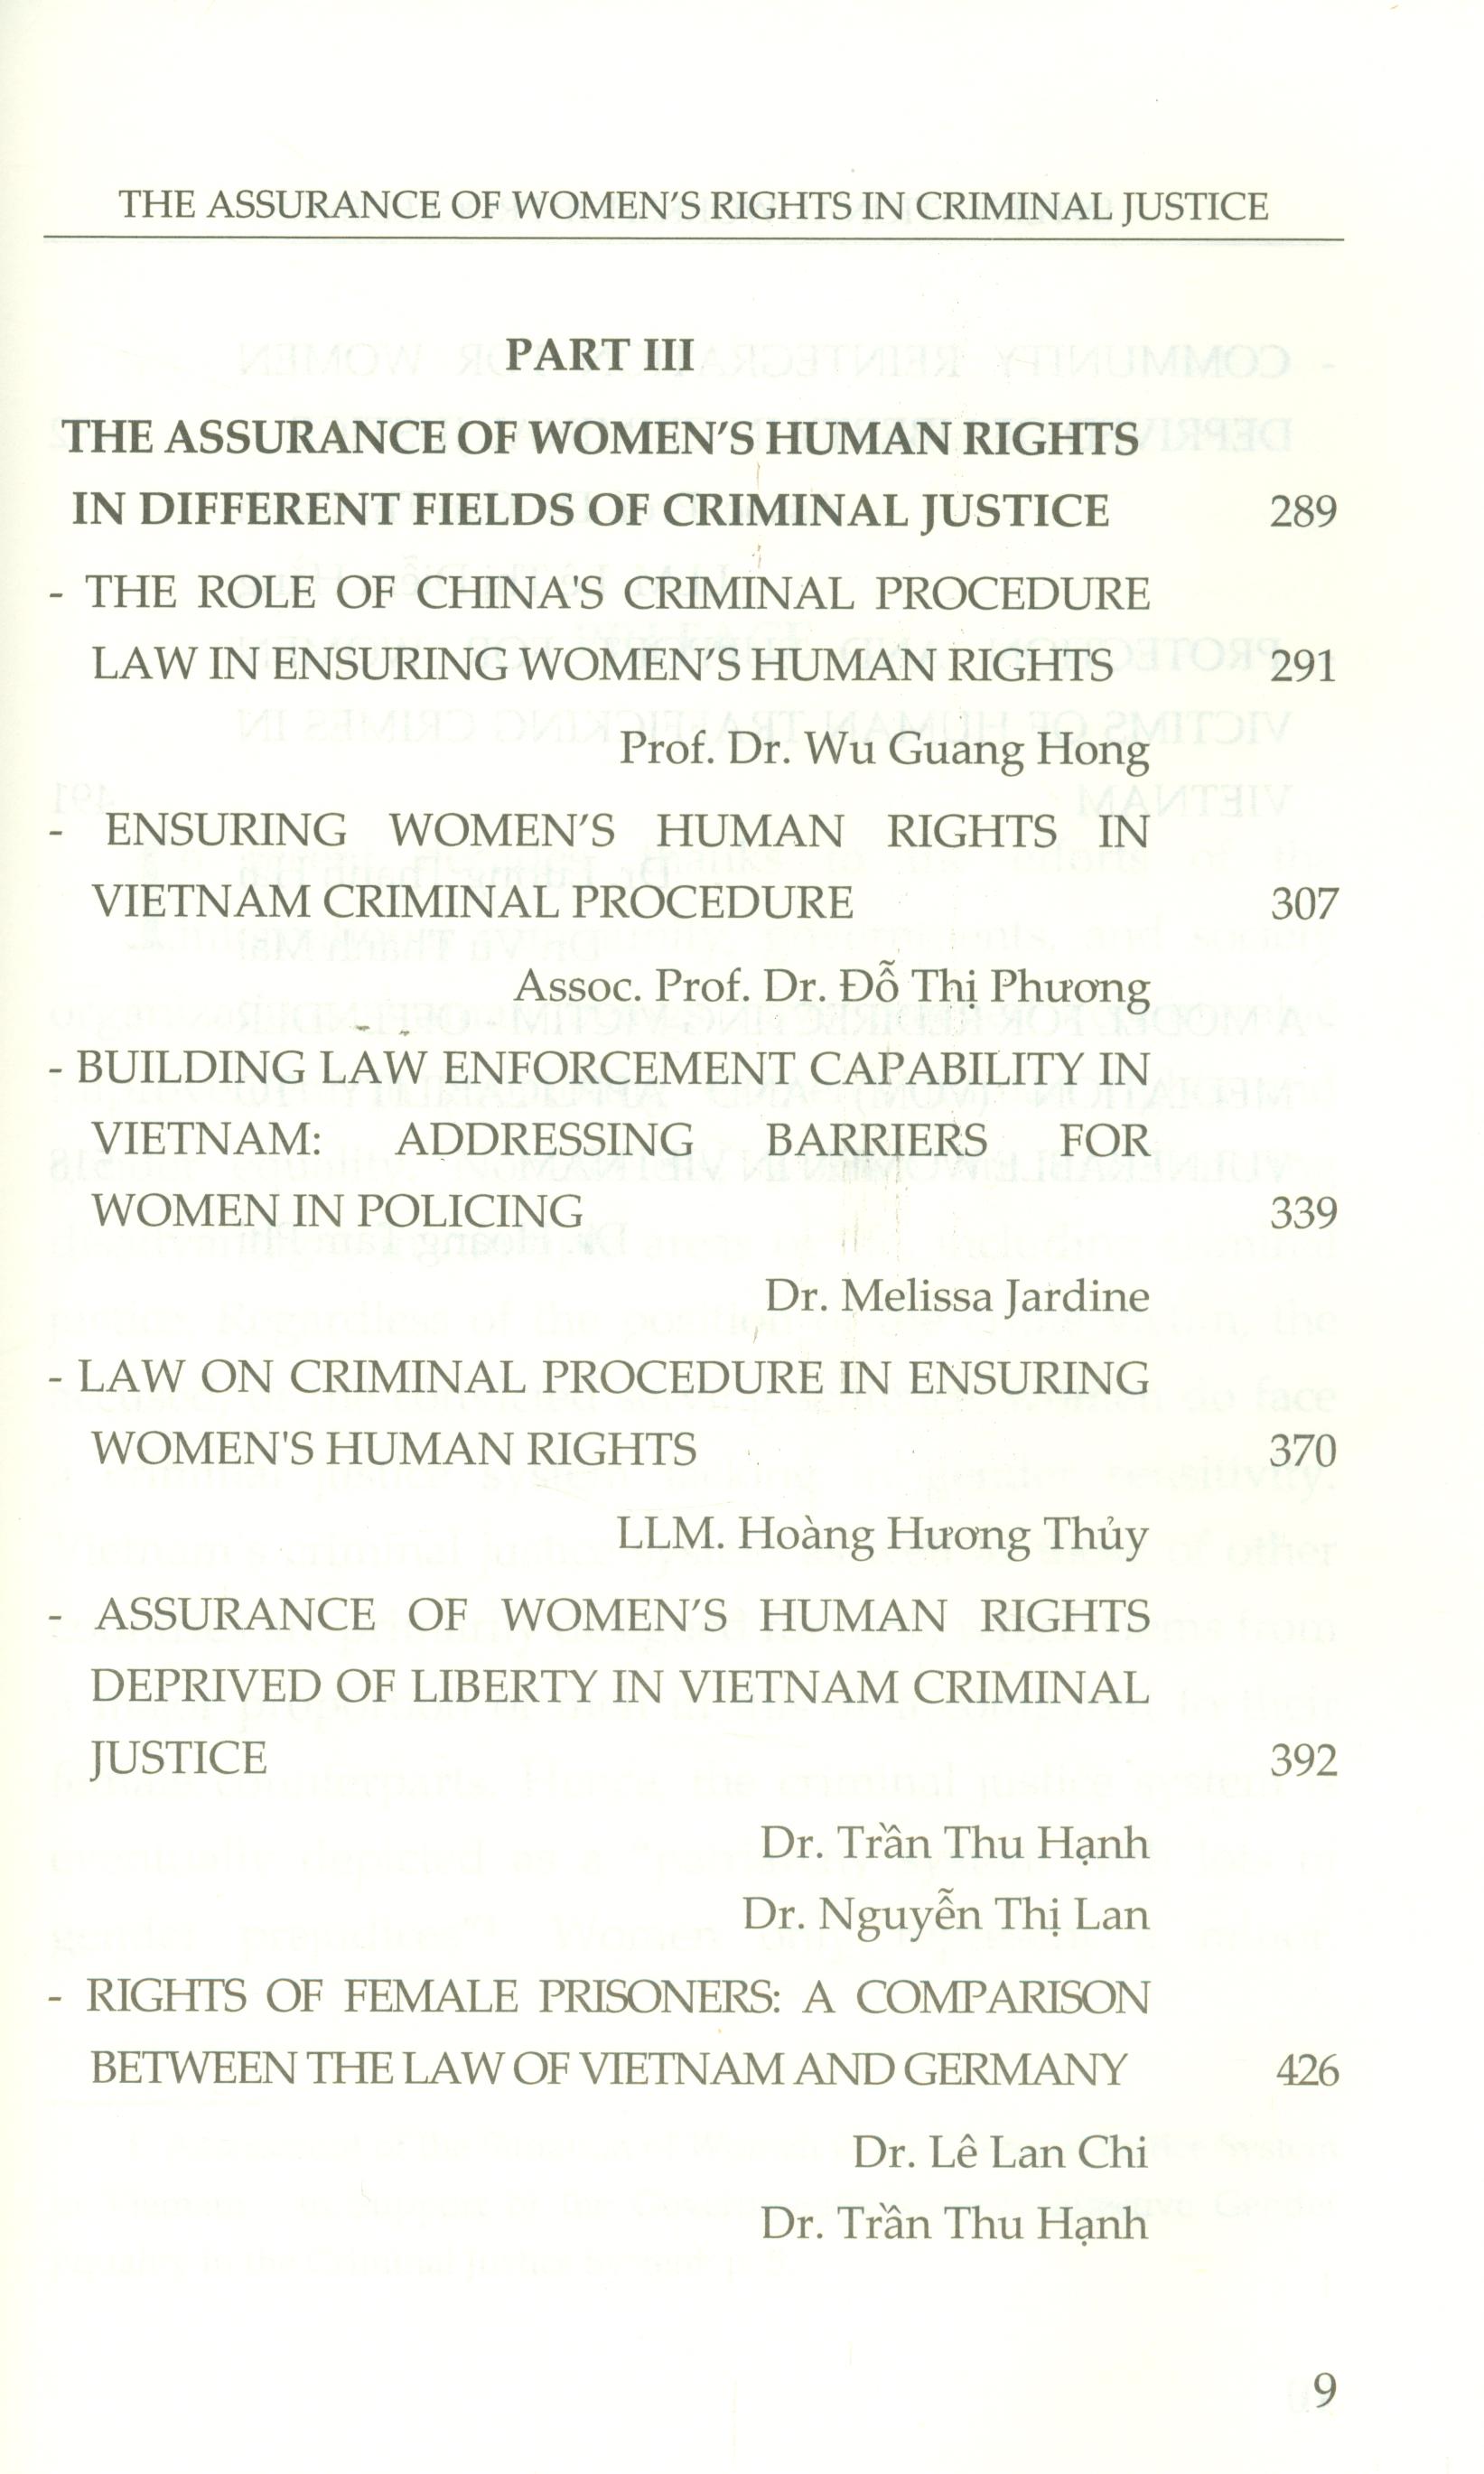 The Assurance Of Women's Human Rights In Criminal Justice (International Workshop Proceedings)